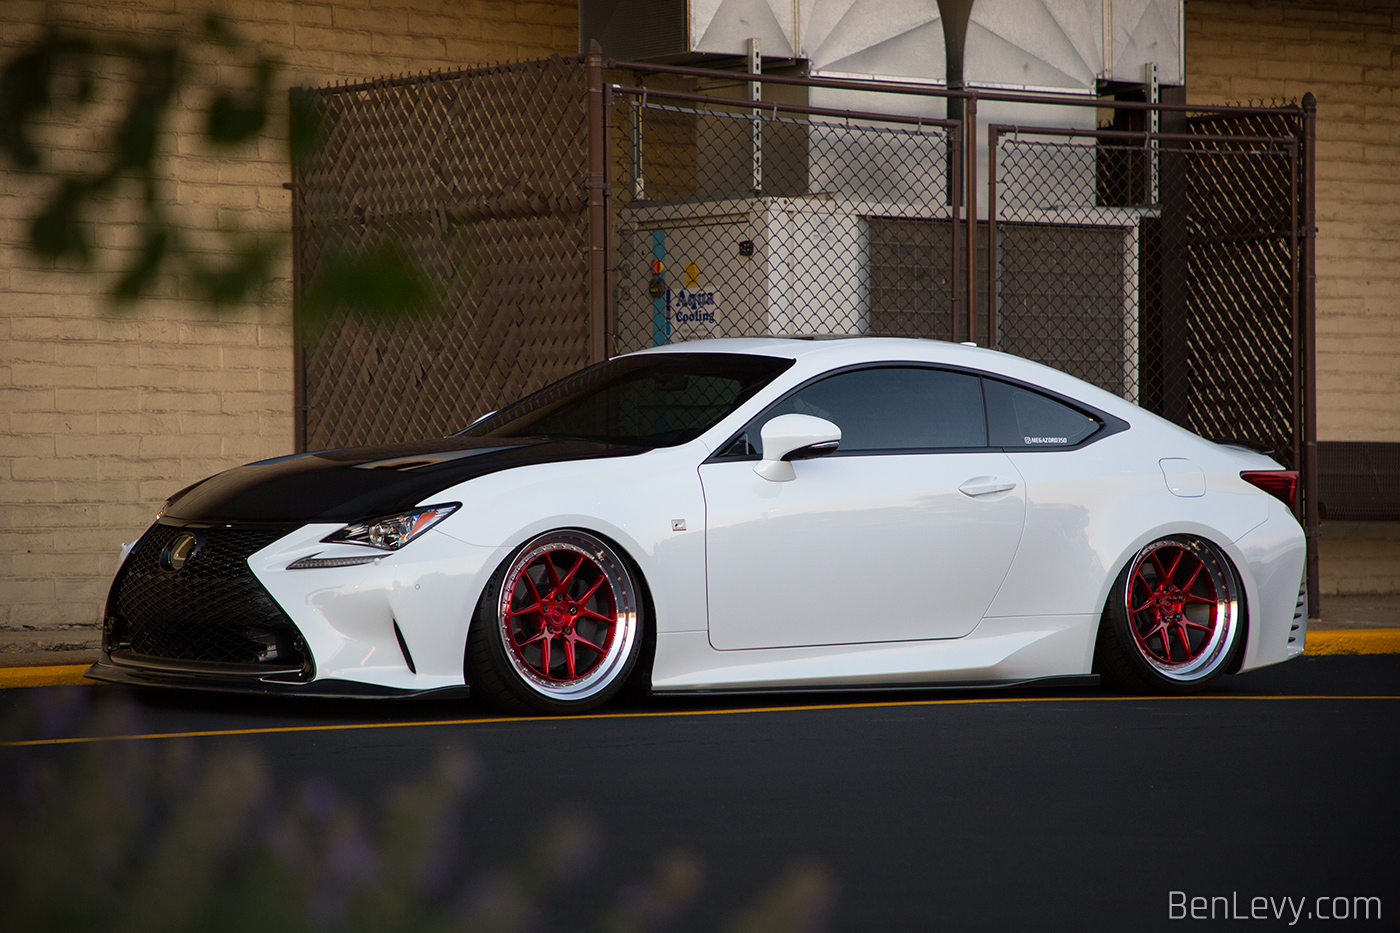 Bagged Lexus RC350 in White